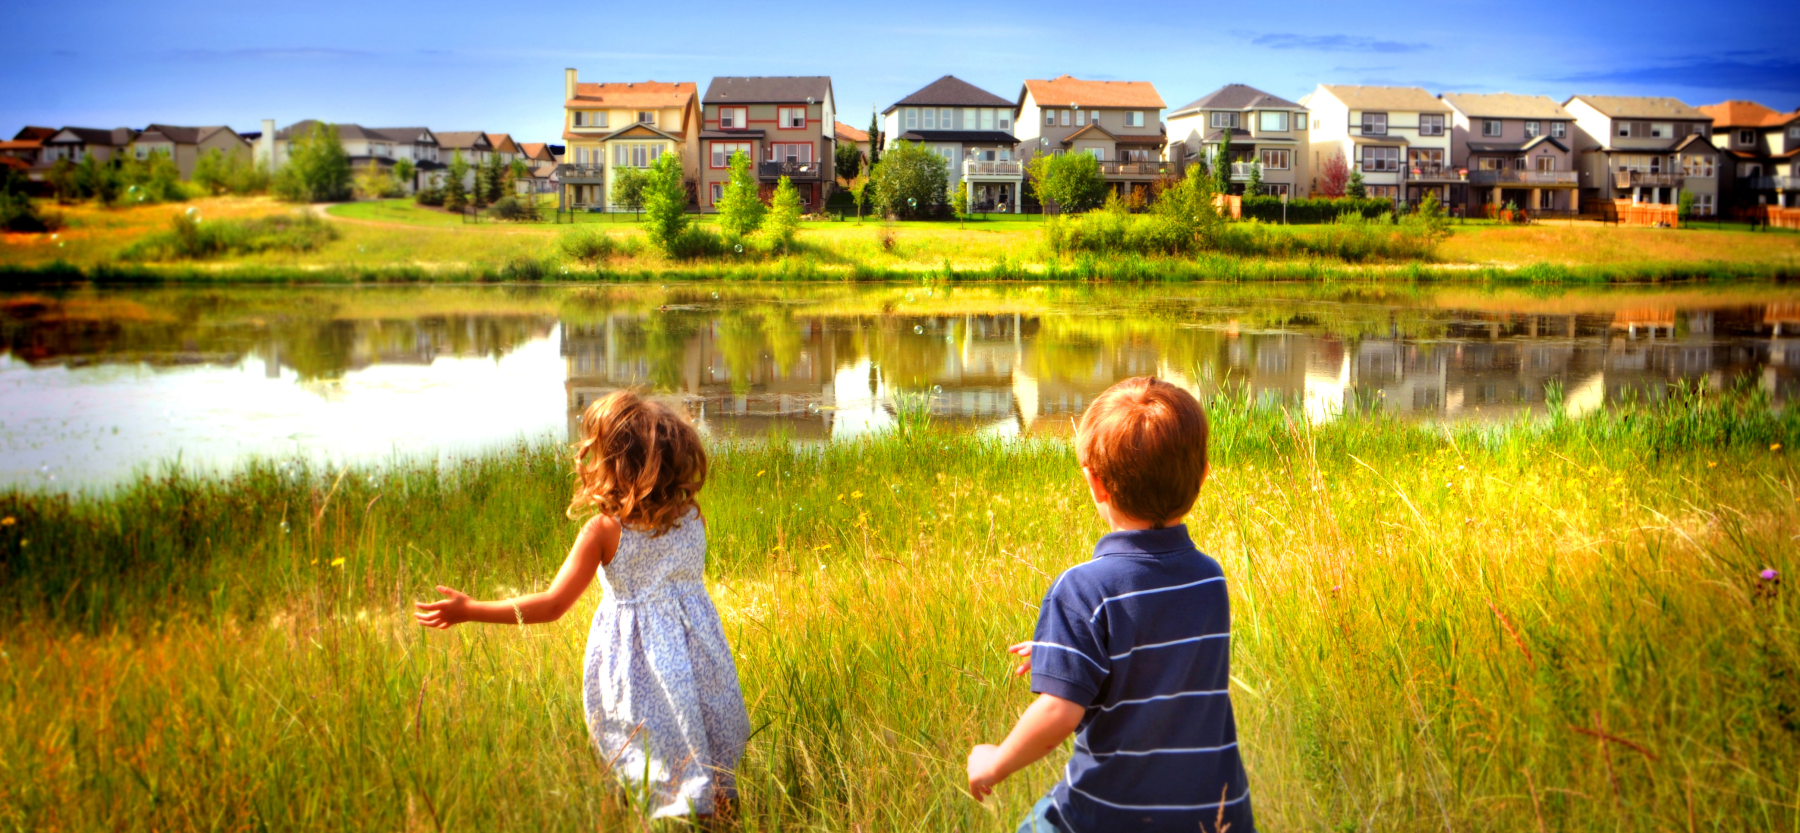 How to Showcase Master-Planned Community Amenities